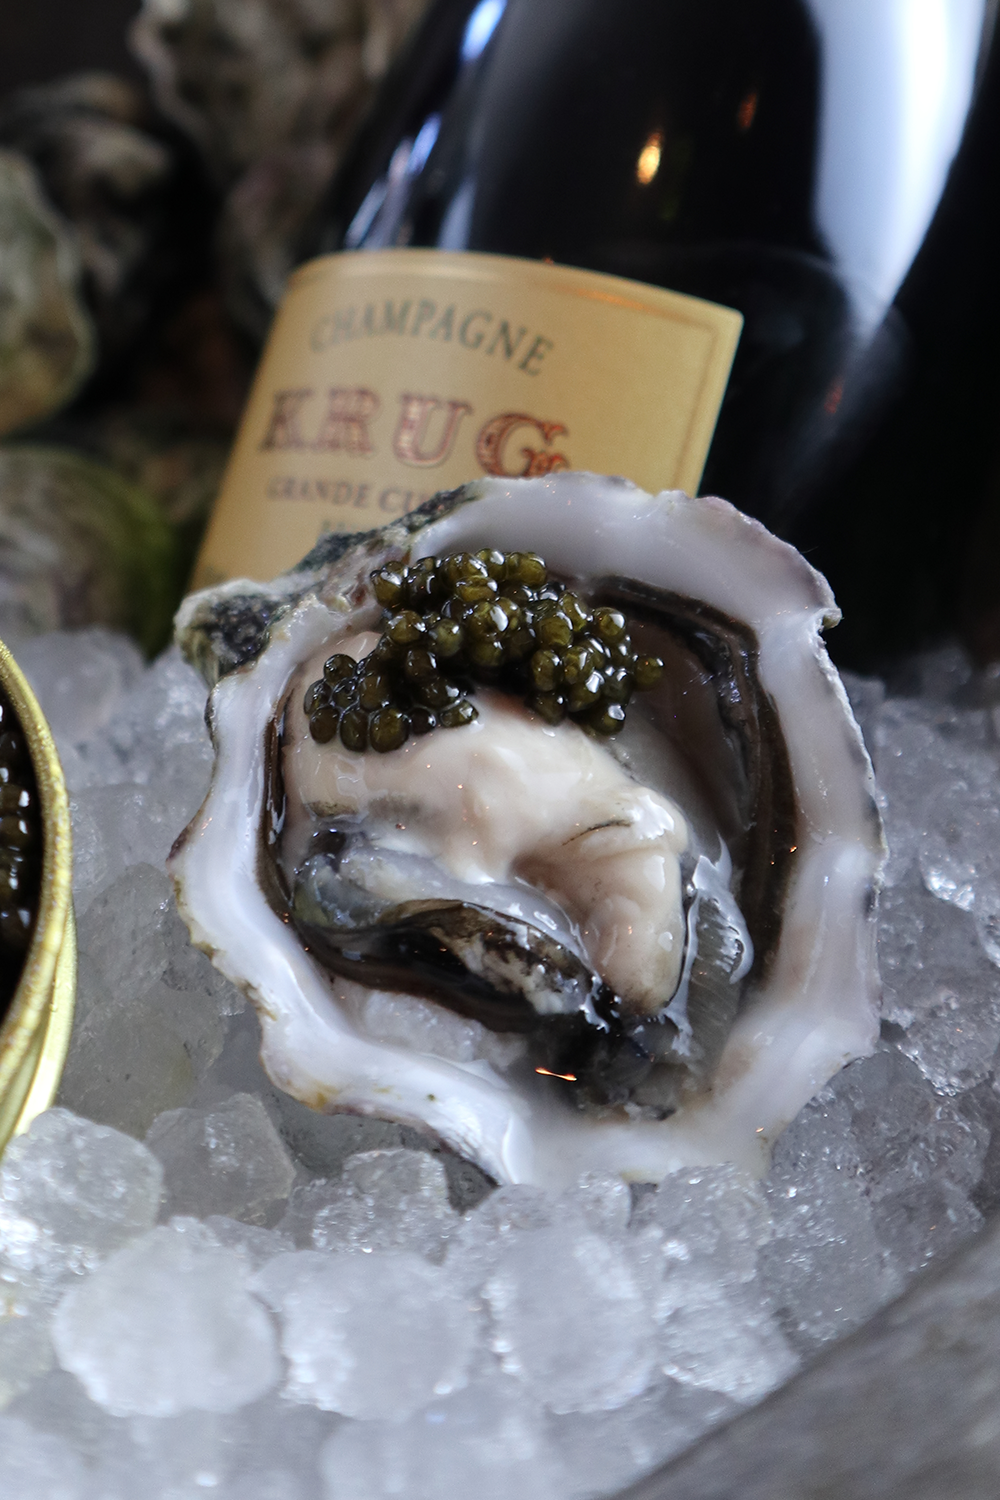 Chef's Table For Two: Osetra Royal Caviar + Oysters + Krug